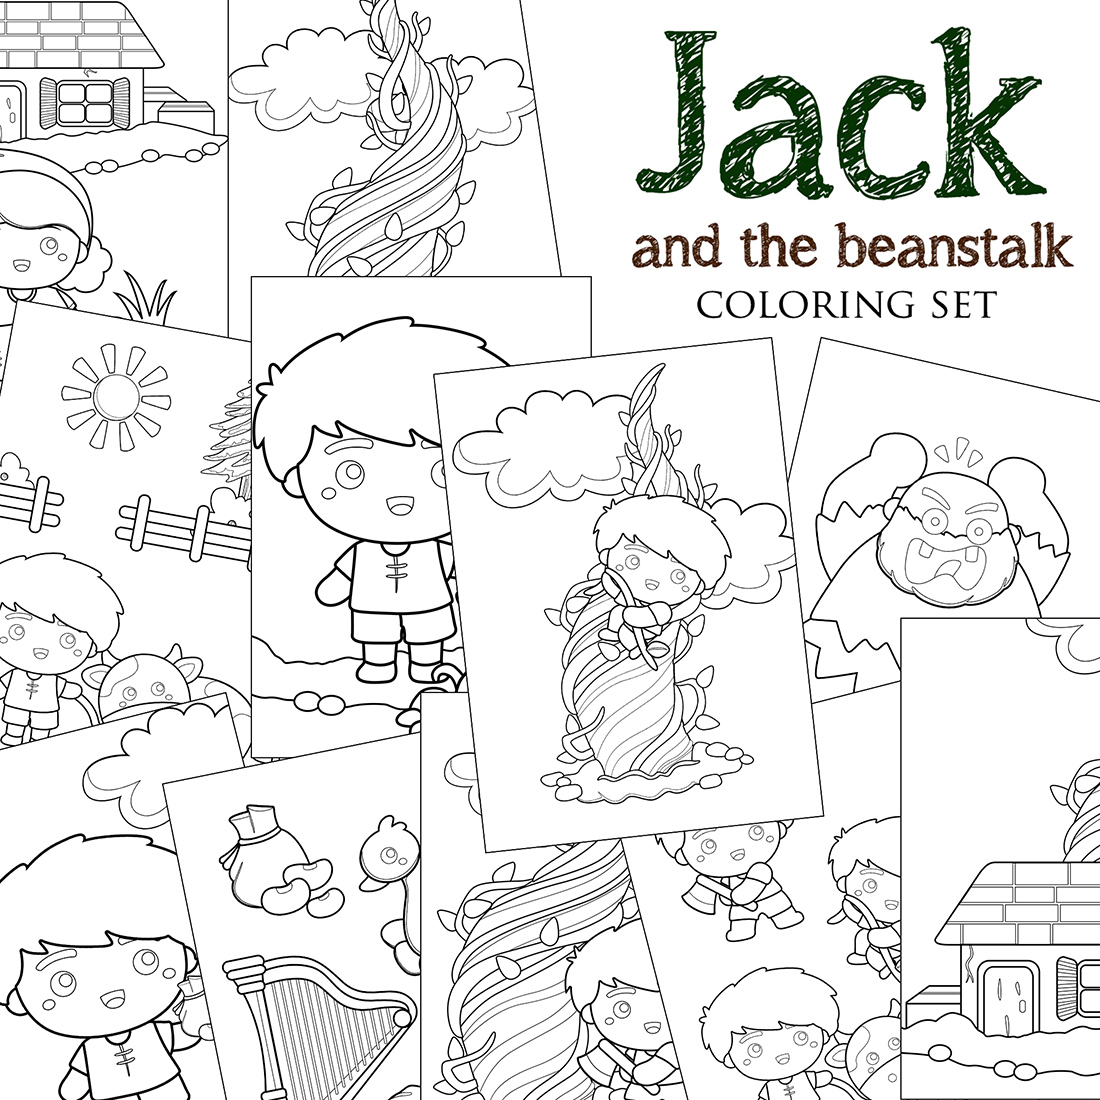 Jack And The Beanstalk Bedtime Story for Kids